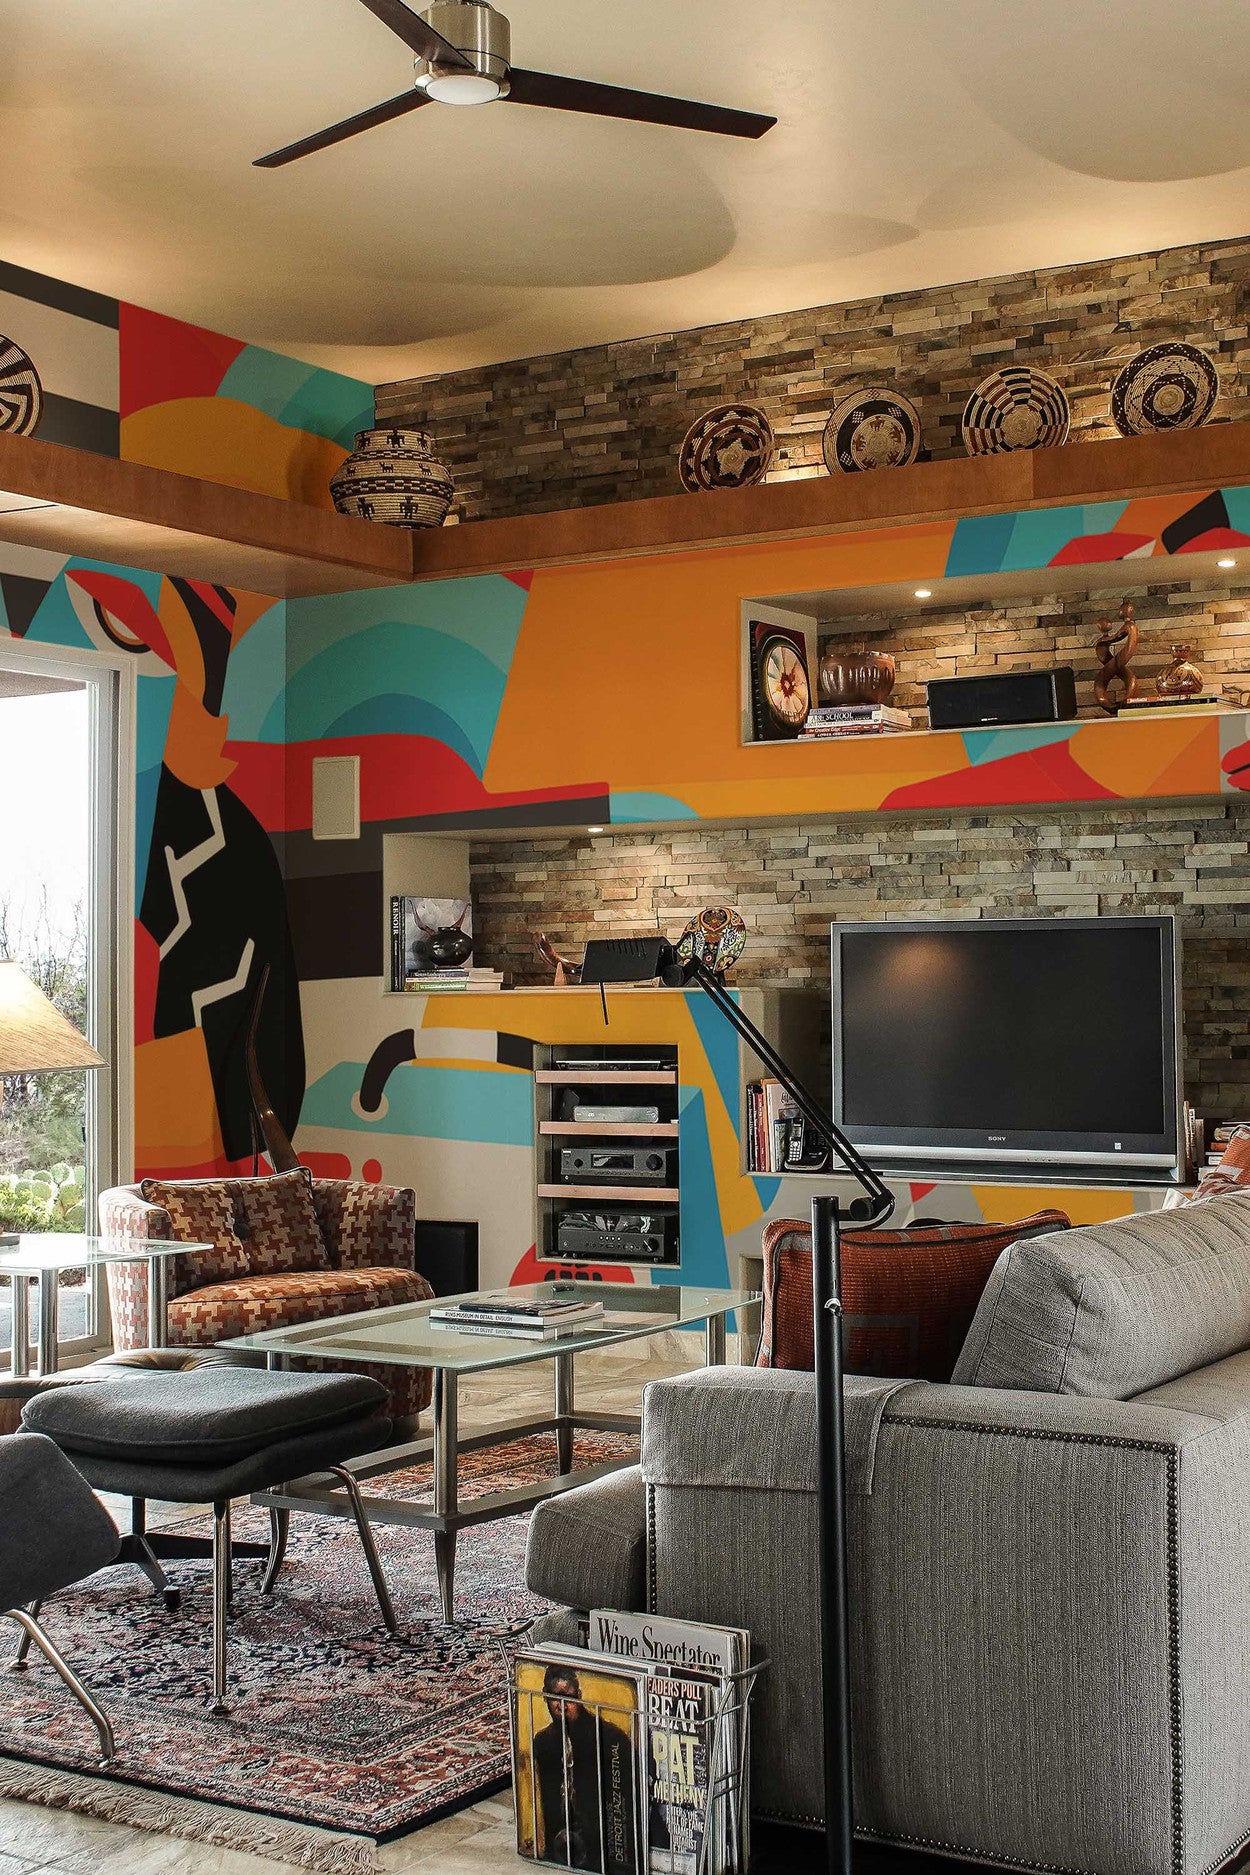 A living room interior featuring a colorful wall mural with abstract design, complemented by modern furniture and decorative ceiling fans.